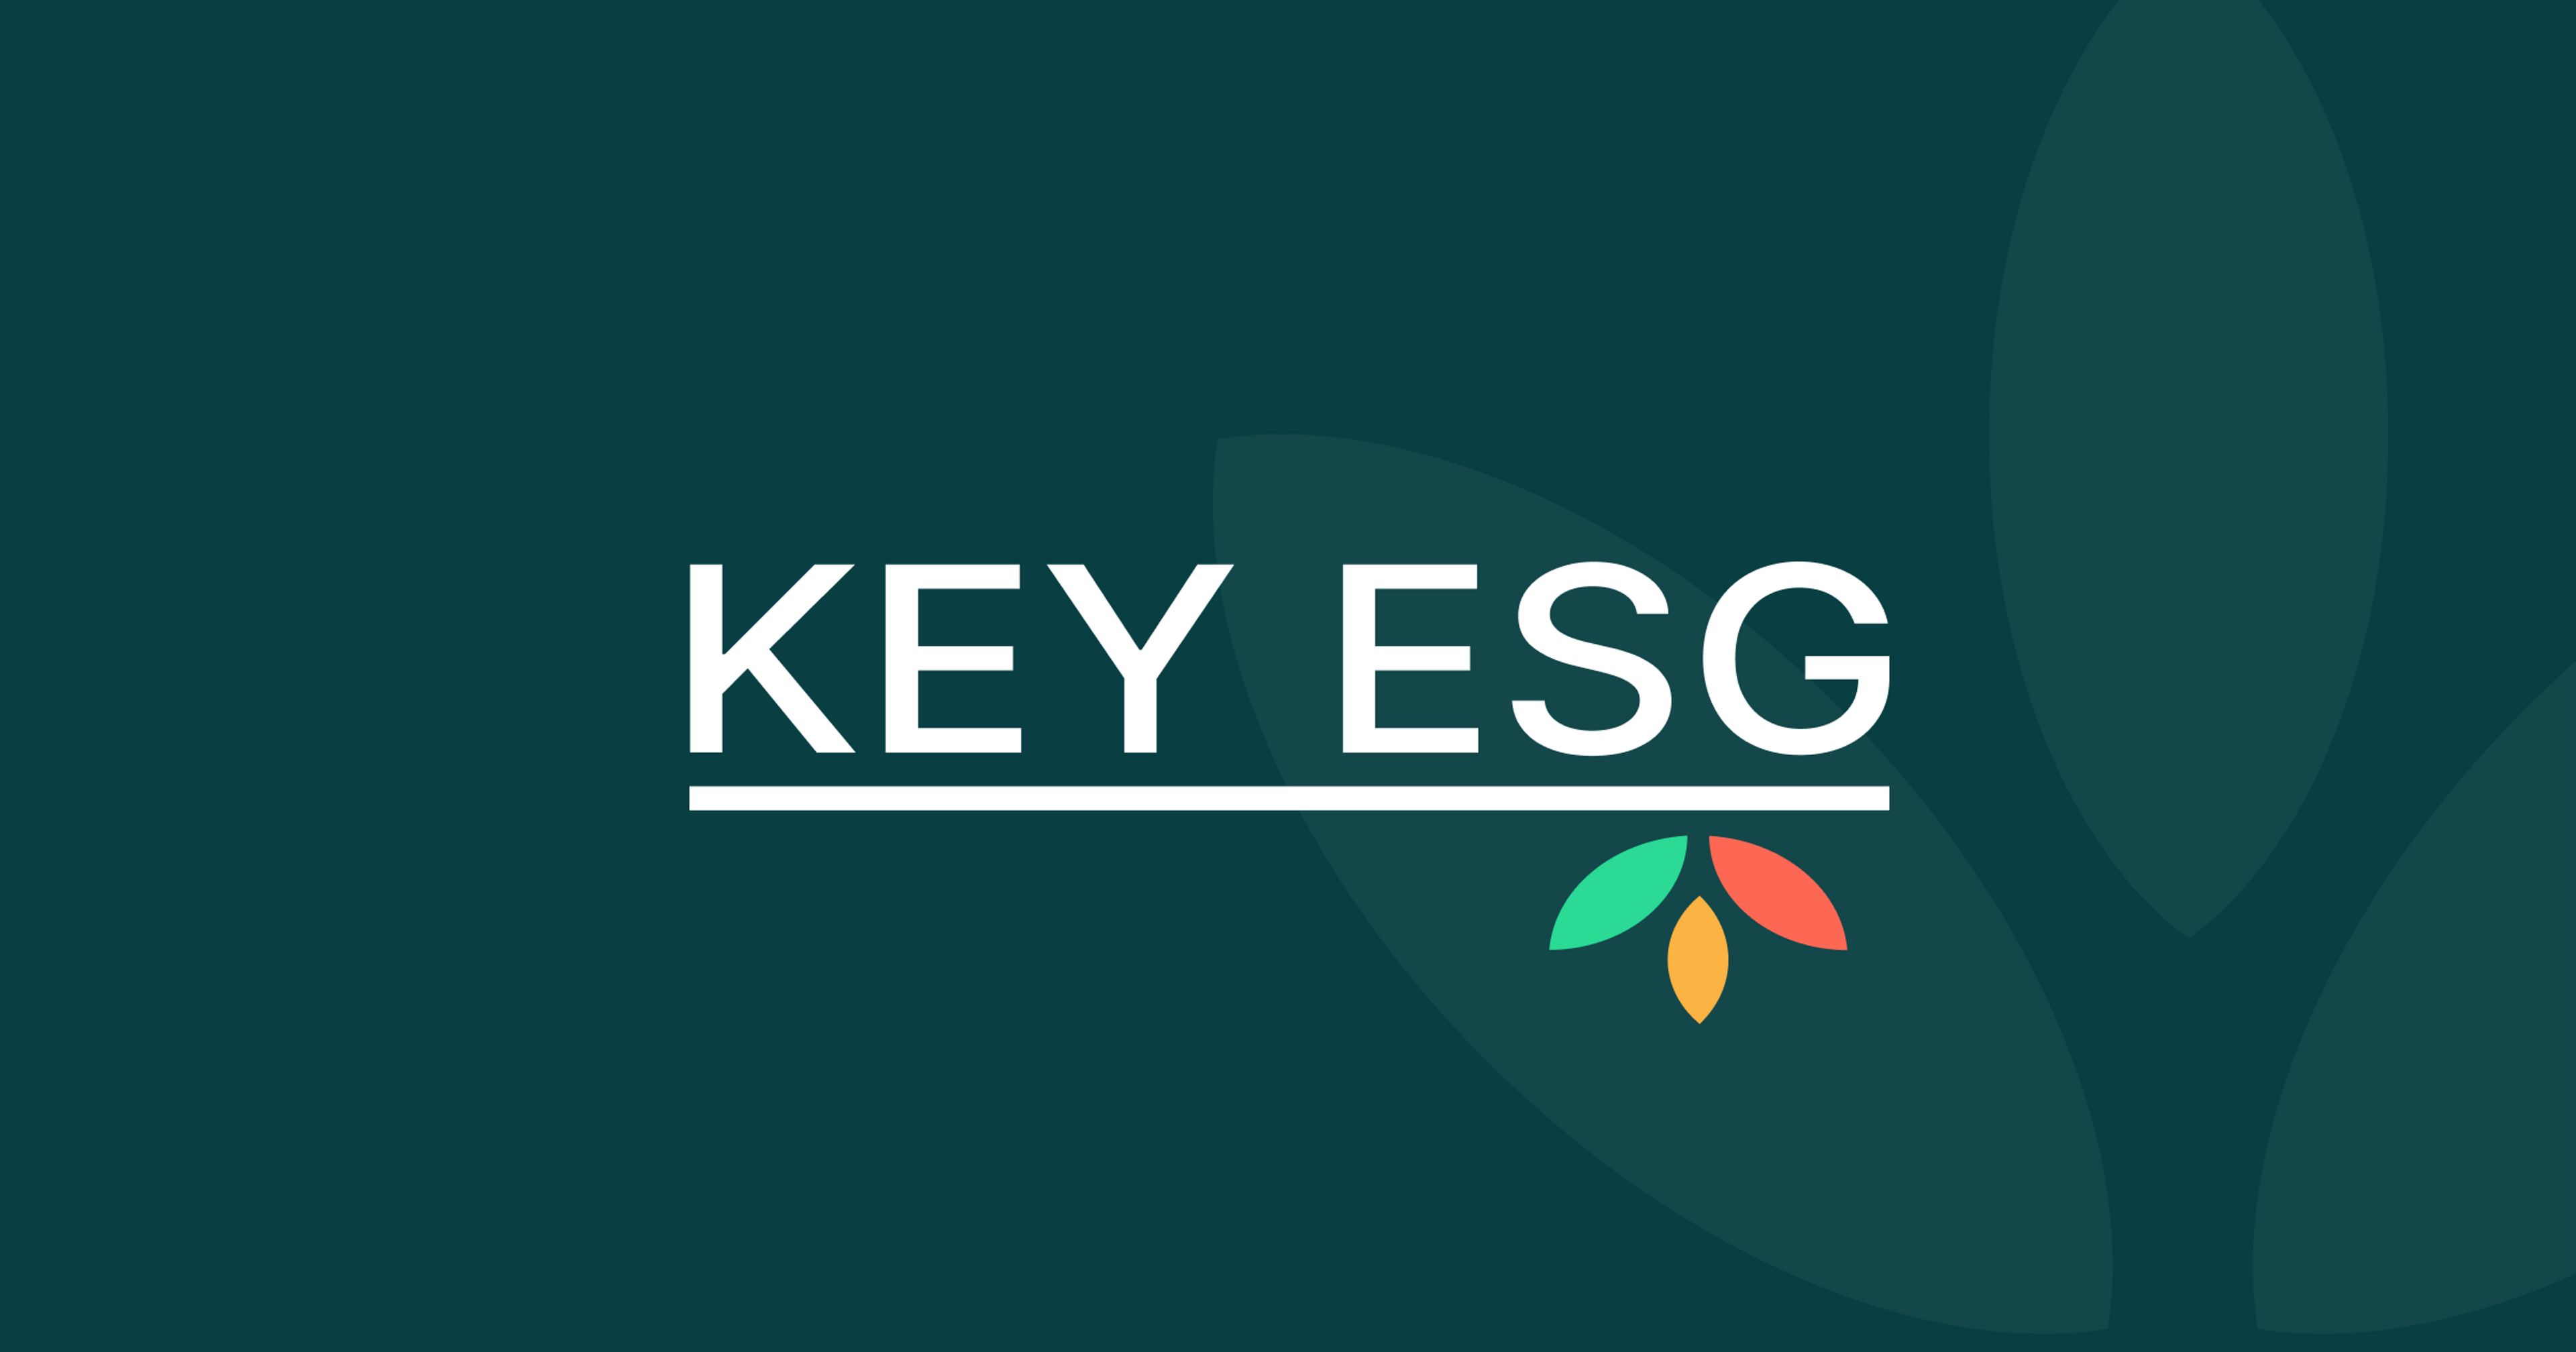 KEY ESG is looking for an ESG Specialist